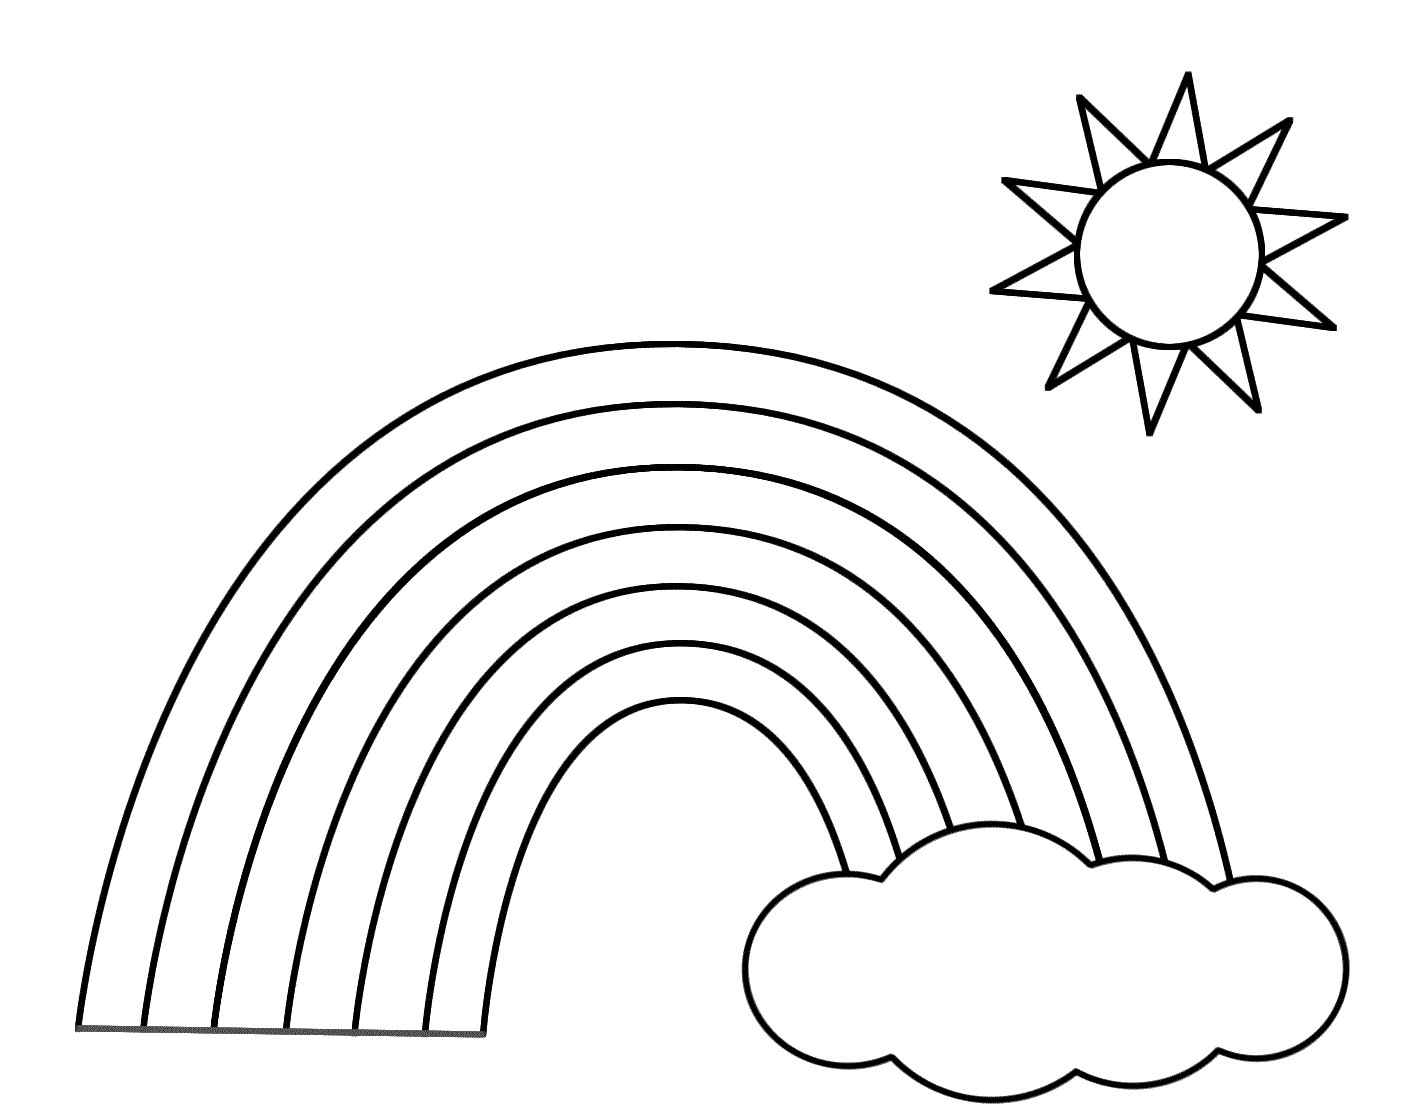 Printable Rainbow Coloring Pages
 R is for Rainbow coloring page Rainbows